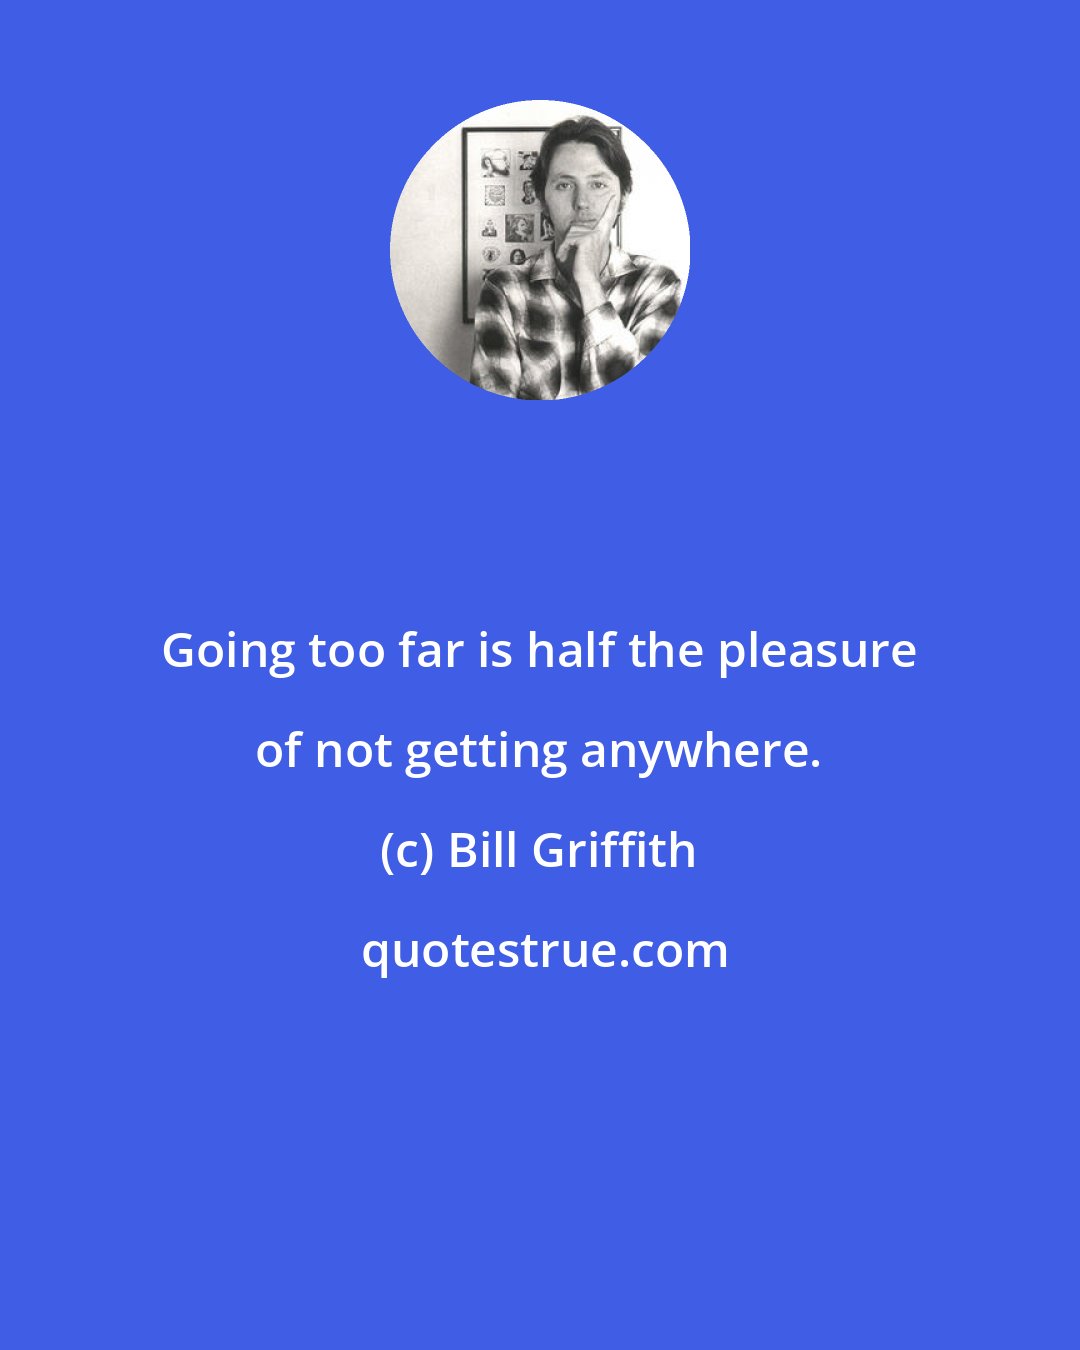 Bill Griffith: Going too far is half the pleasure of not getting anywhere.